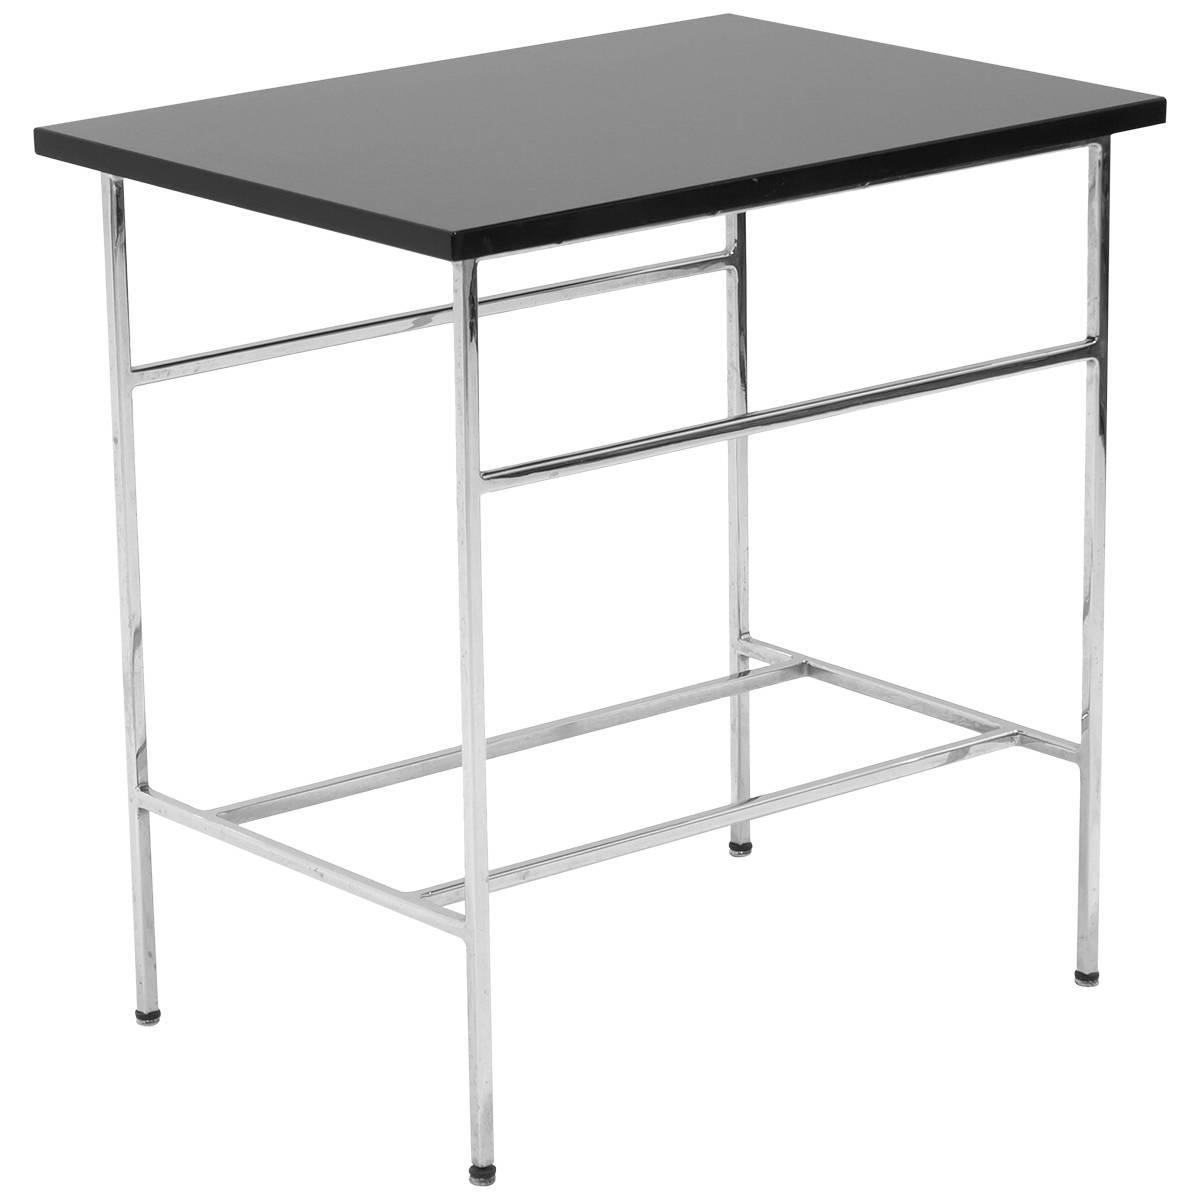 Paul McCobb Side Table, Black Glass and Chrome / Nickel-Plated Brass